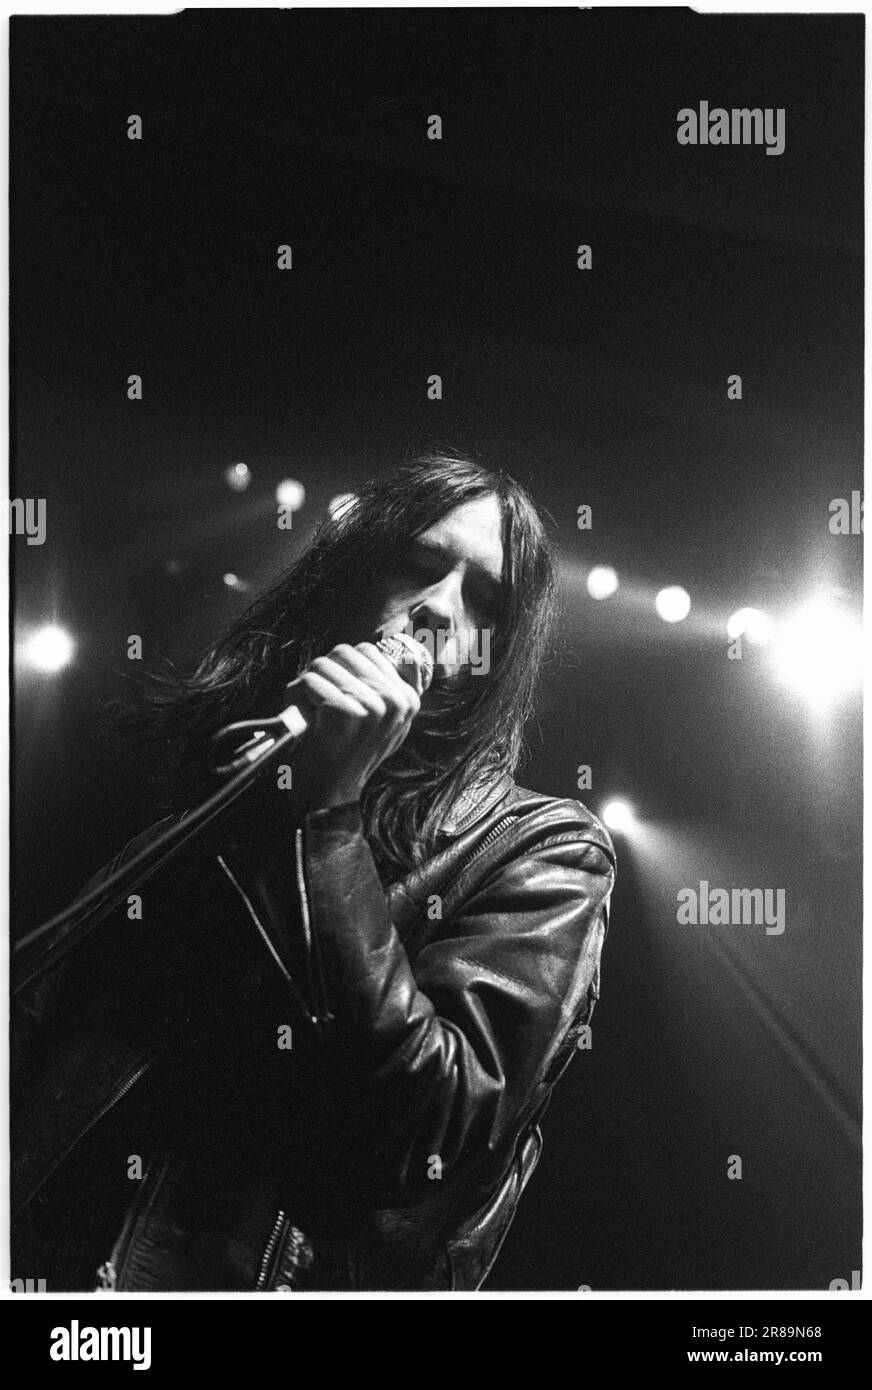 PRIMAL SCREAM, CONCERT, 1994: Bobby Gillespie of Scottish band Primal Scream playing live at the Great Hall, Cardiff University, Wales, UK on 7 April 1994. Photo: Rob Watkins. INFO: rimal Scream, a Scottish rock band, is known for their genre-defying approach. Albums like 'Screamadelica' fused rock with dance and won the Mercury Prize. Their diverse discography spans psychedelic, alternative, and electronic realms, reflecting their evolution and enduring influence. Stock Photo